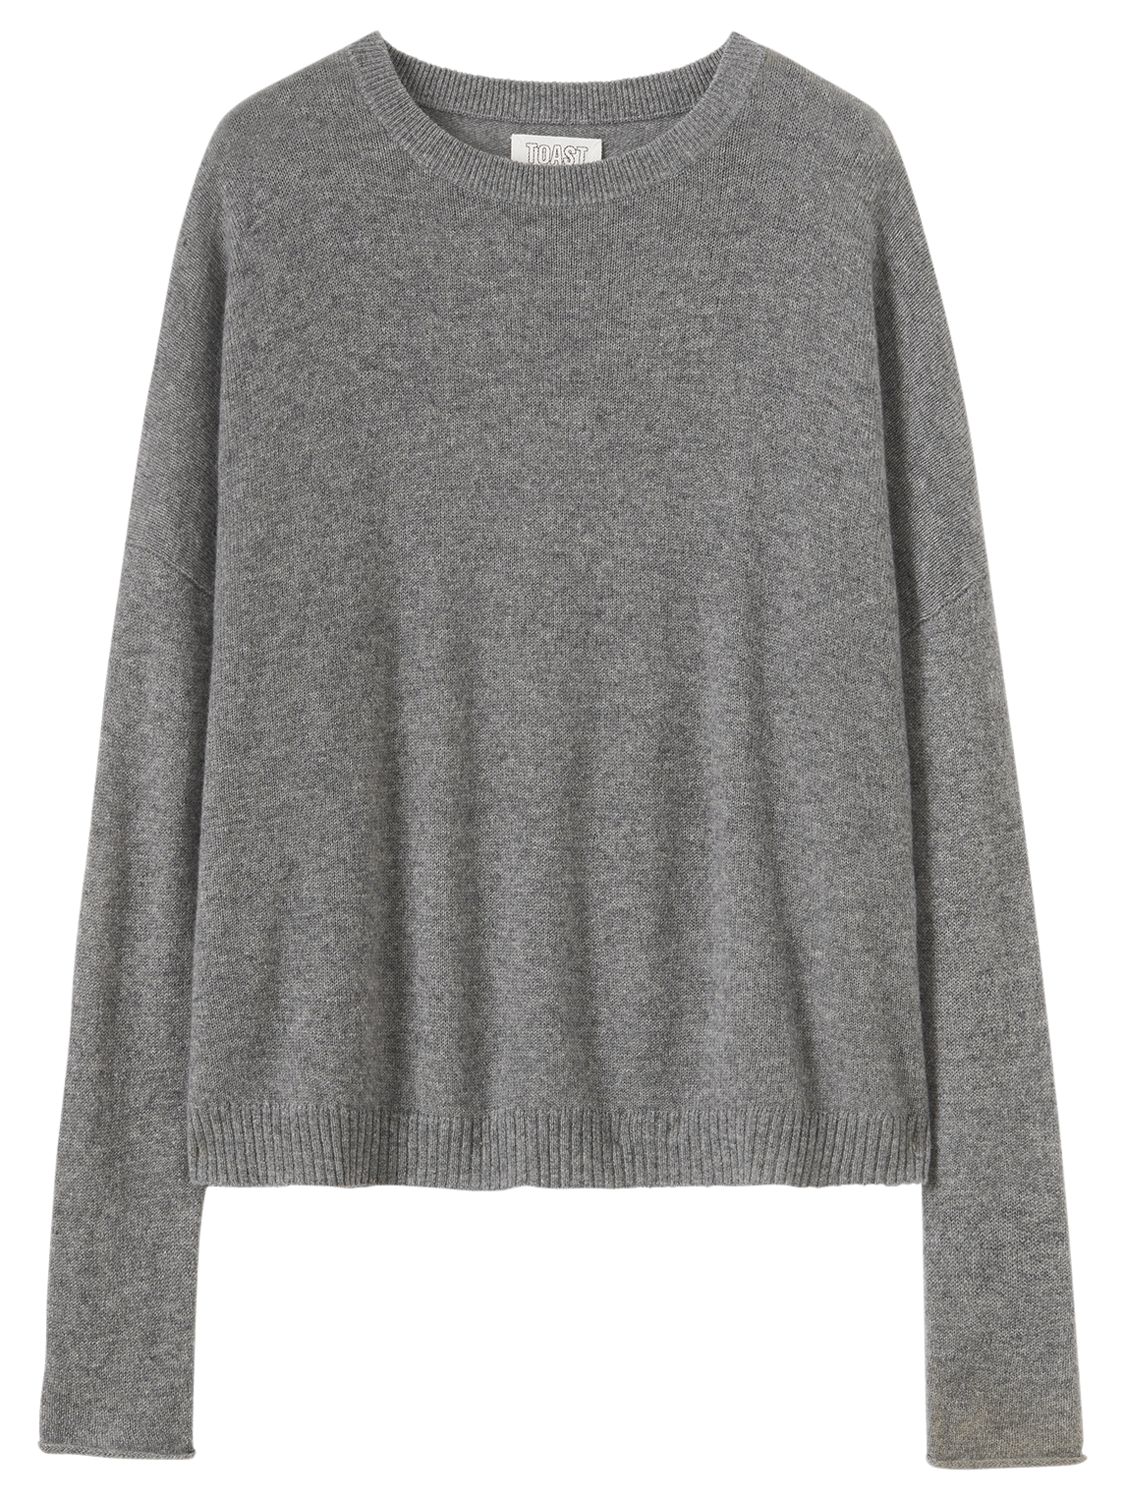 Toast Boxy Wool Cashmere Jumper at John Lewis